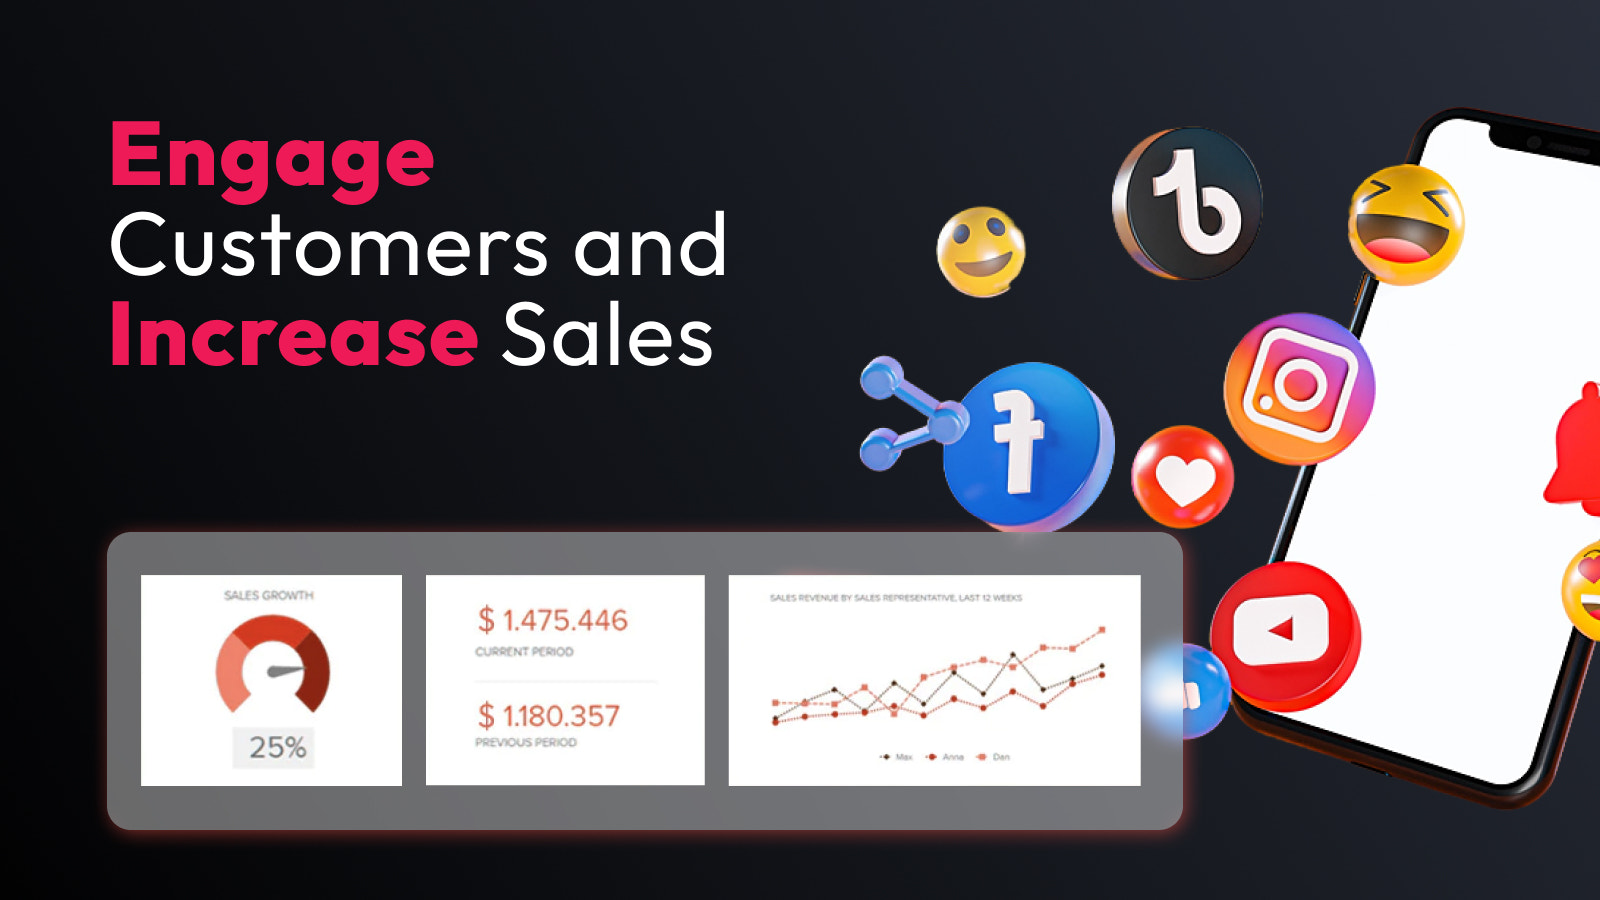 Engage customers and increase sales